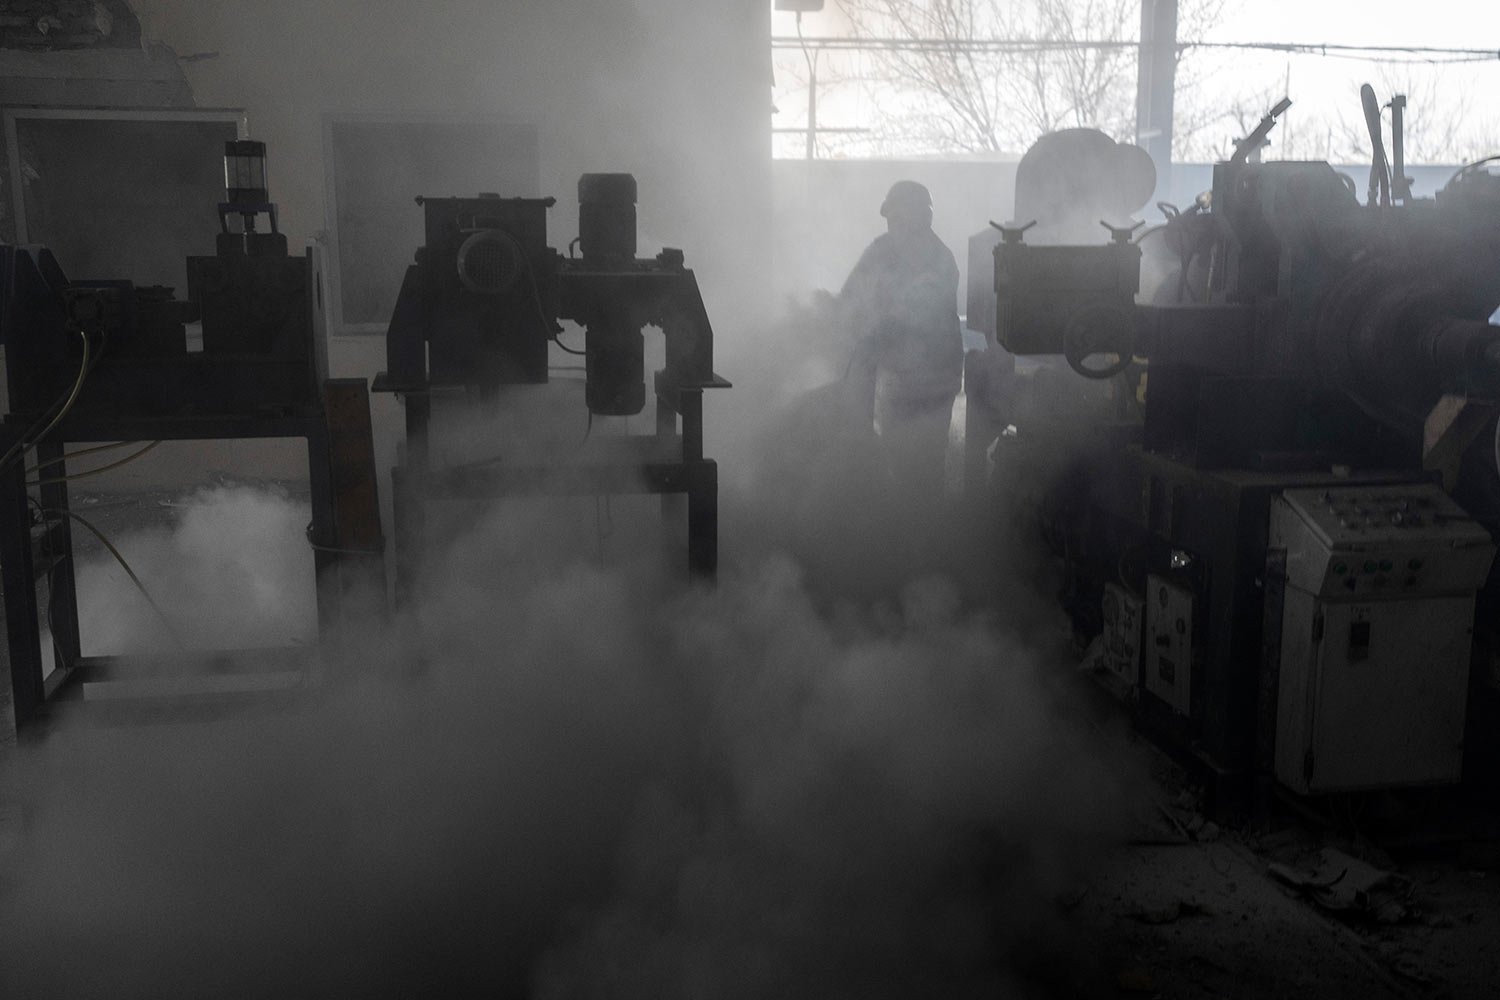  Firefighters try to extinguish the fire at a damaged factory following a Russian bombing in Kramatorsk, Ukraine, Thursday, April 14, 2022. (AP Photo/Petros Giannakouris) 